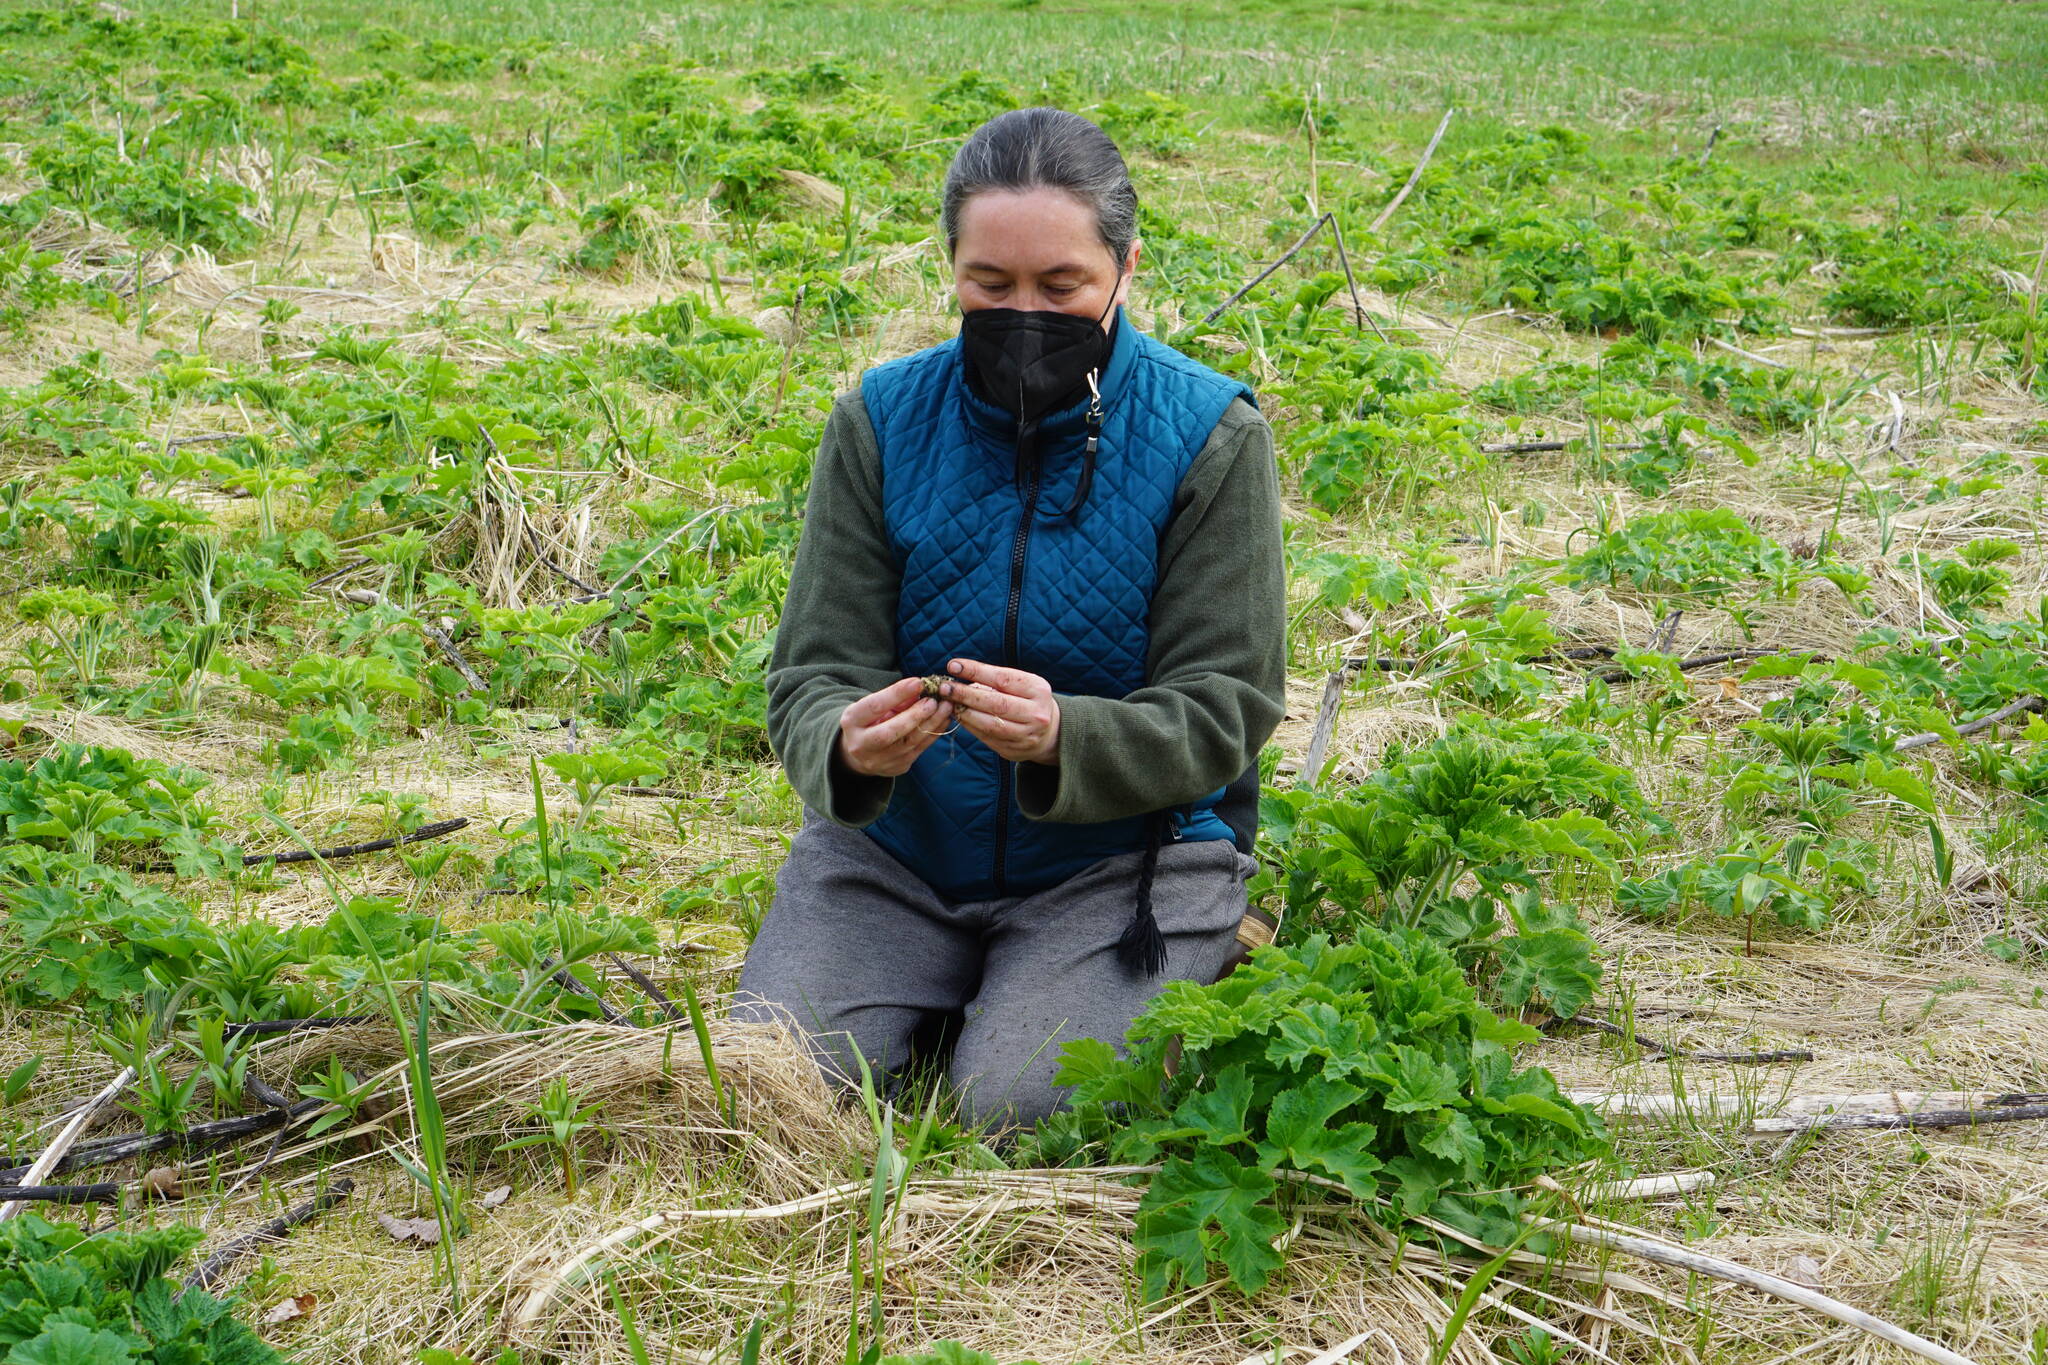 In May, Yéilk’ Vivian Mork of Planet Alaska organized “Stewards of the Land” a traditional plants symposium in Juneau to share knowledge, passion, and respectful harvesting practices of traditional plants as food and medicine. (Courtesy Photo / Jennifer Nu)